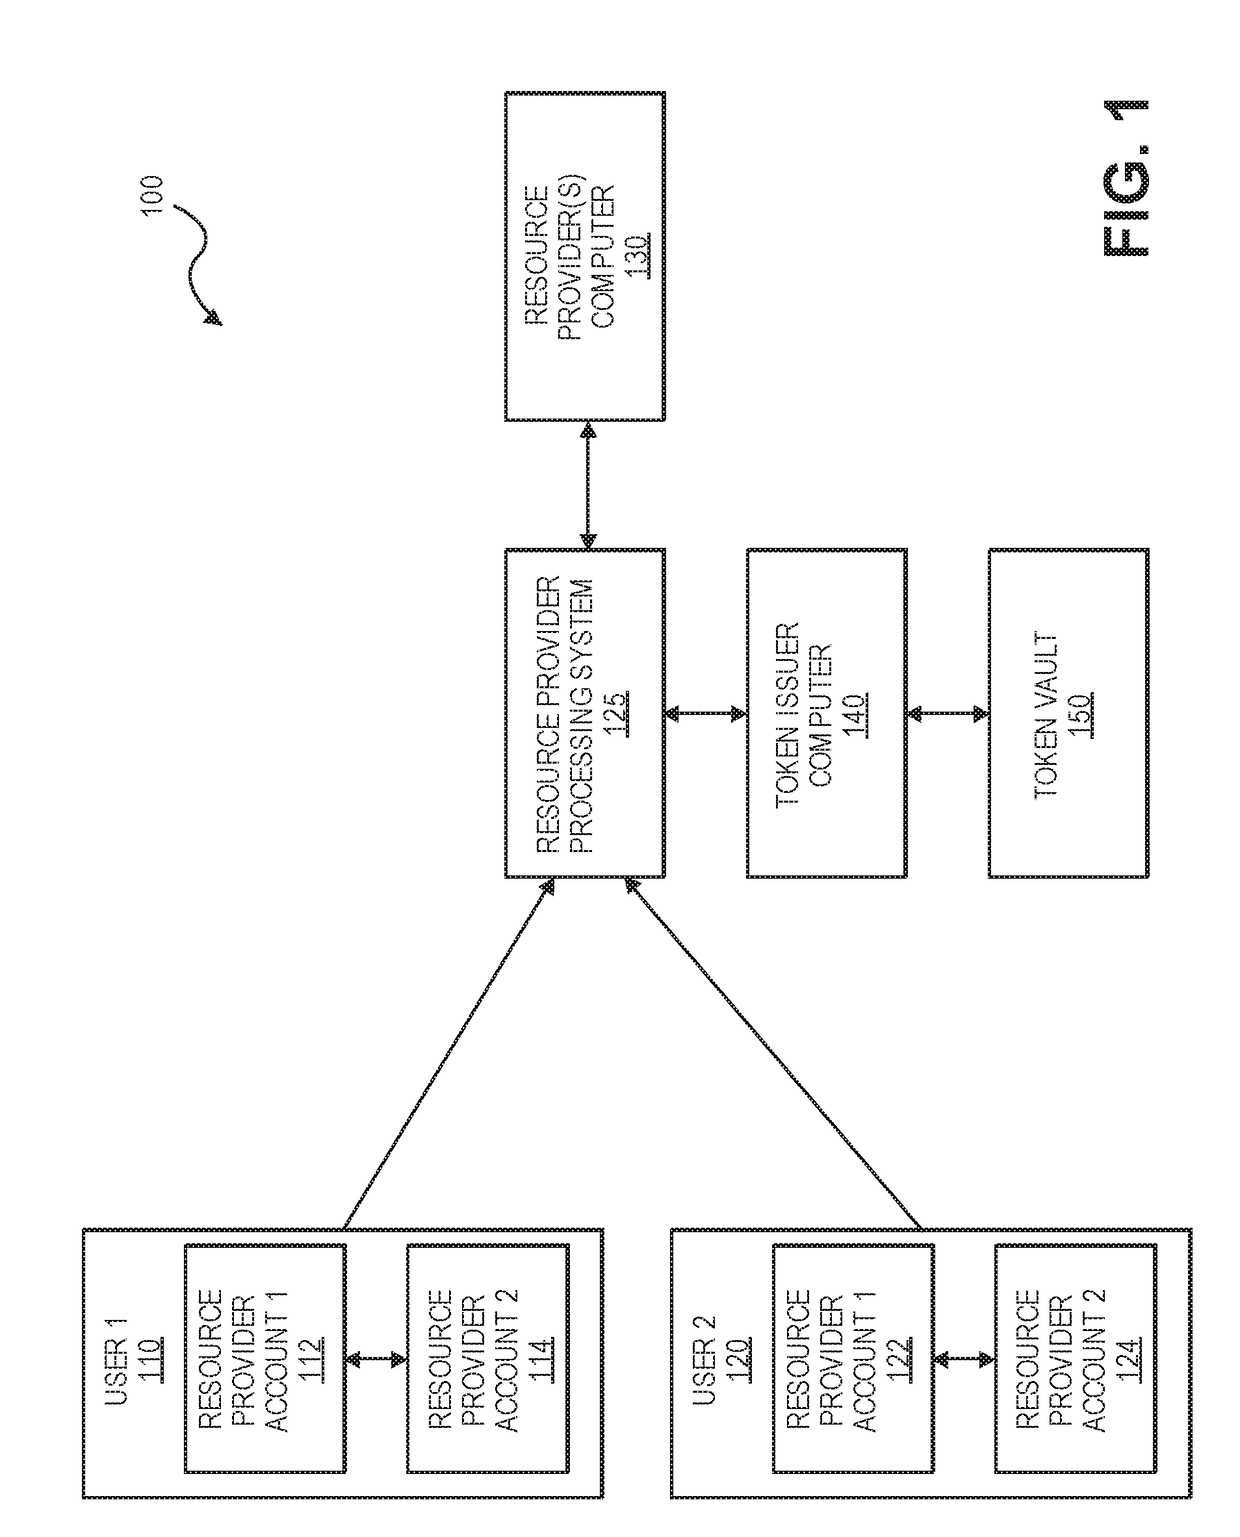 Resource provider account token provisioning and processing